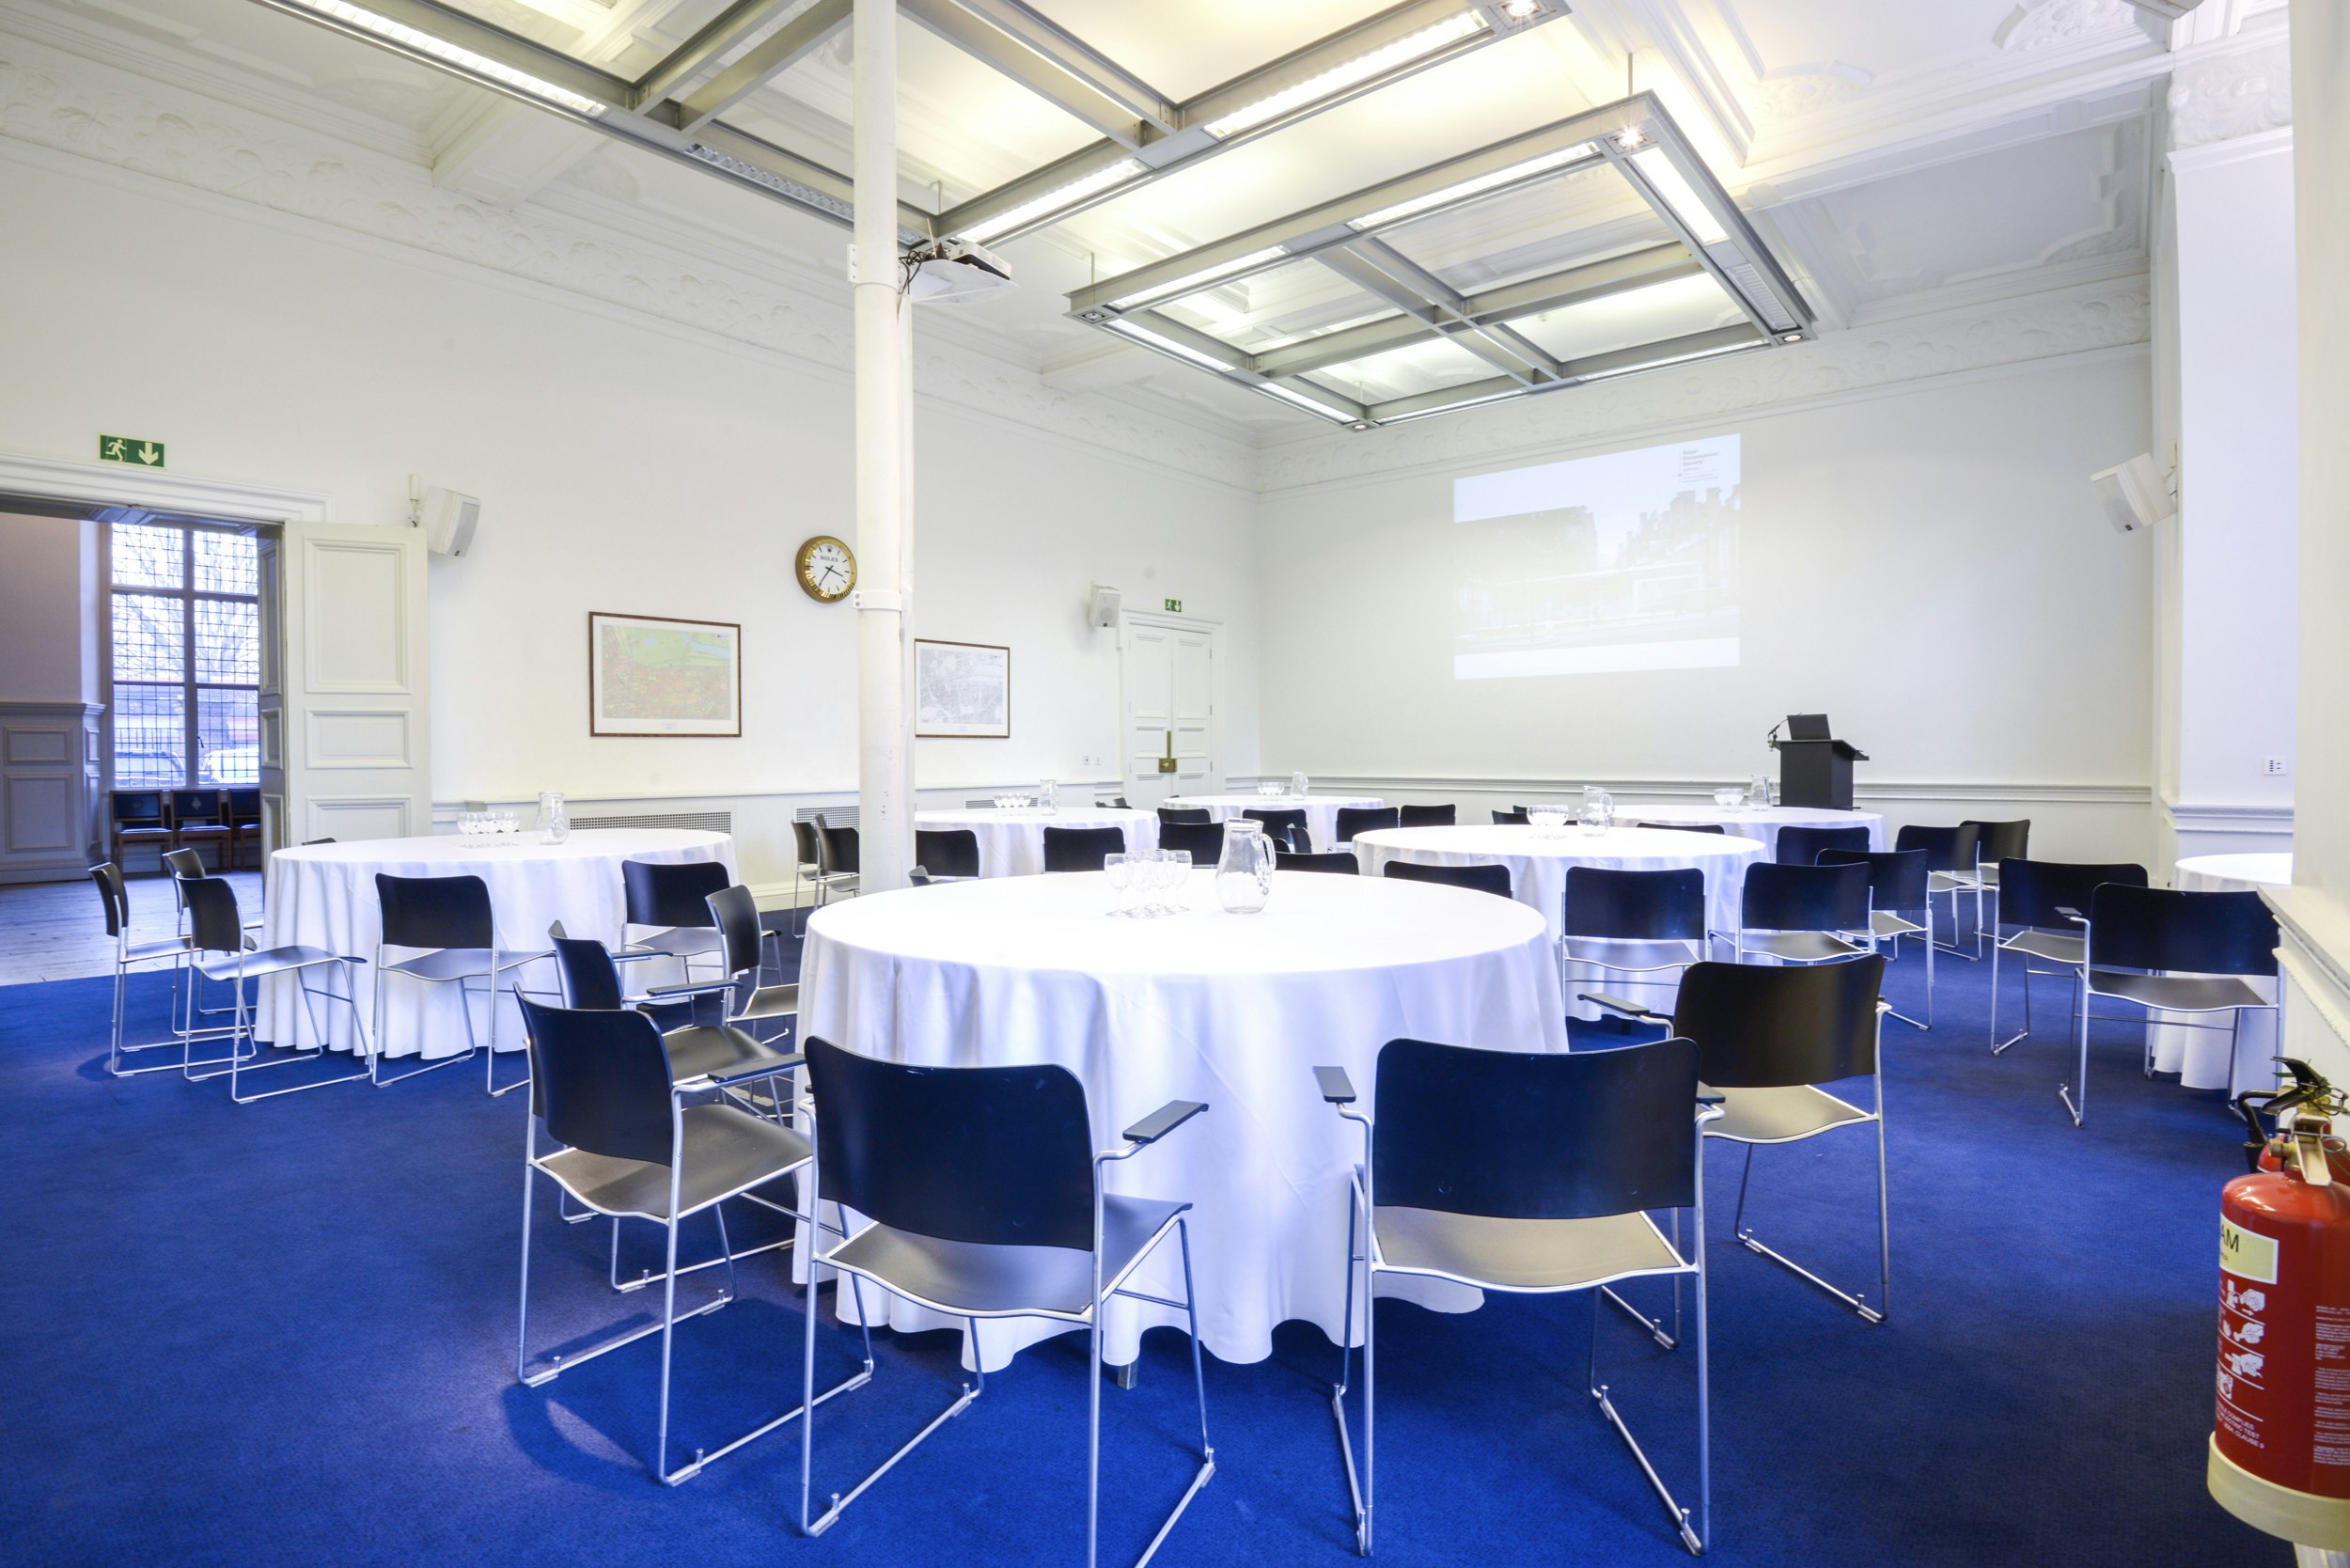 Royal Geographical Society - Main Hall & Education Centre image 2